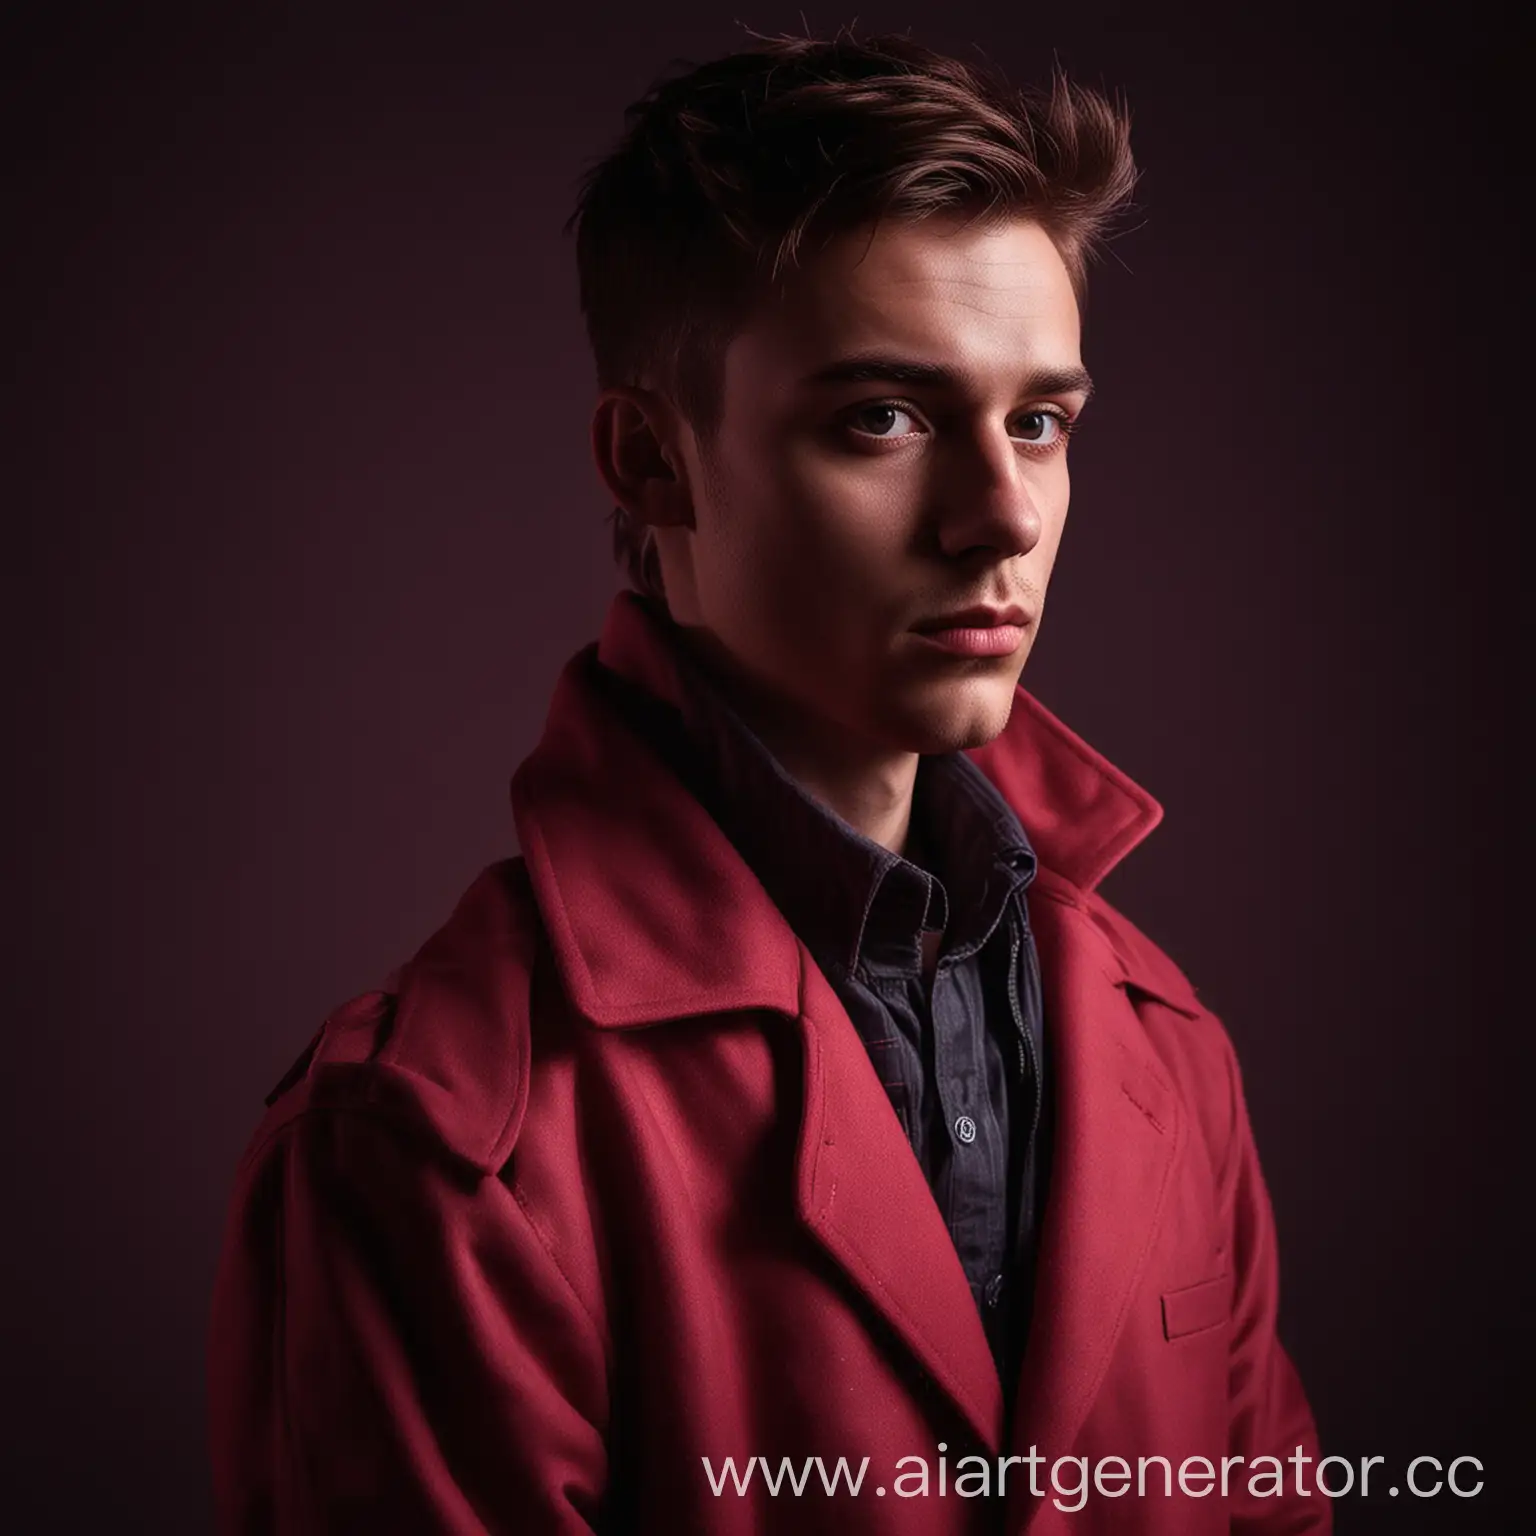 Portrait-of-a-Young-Man-in-Modern-Attire-under-Bordeaux-Neon-Lighting